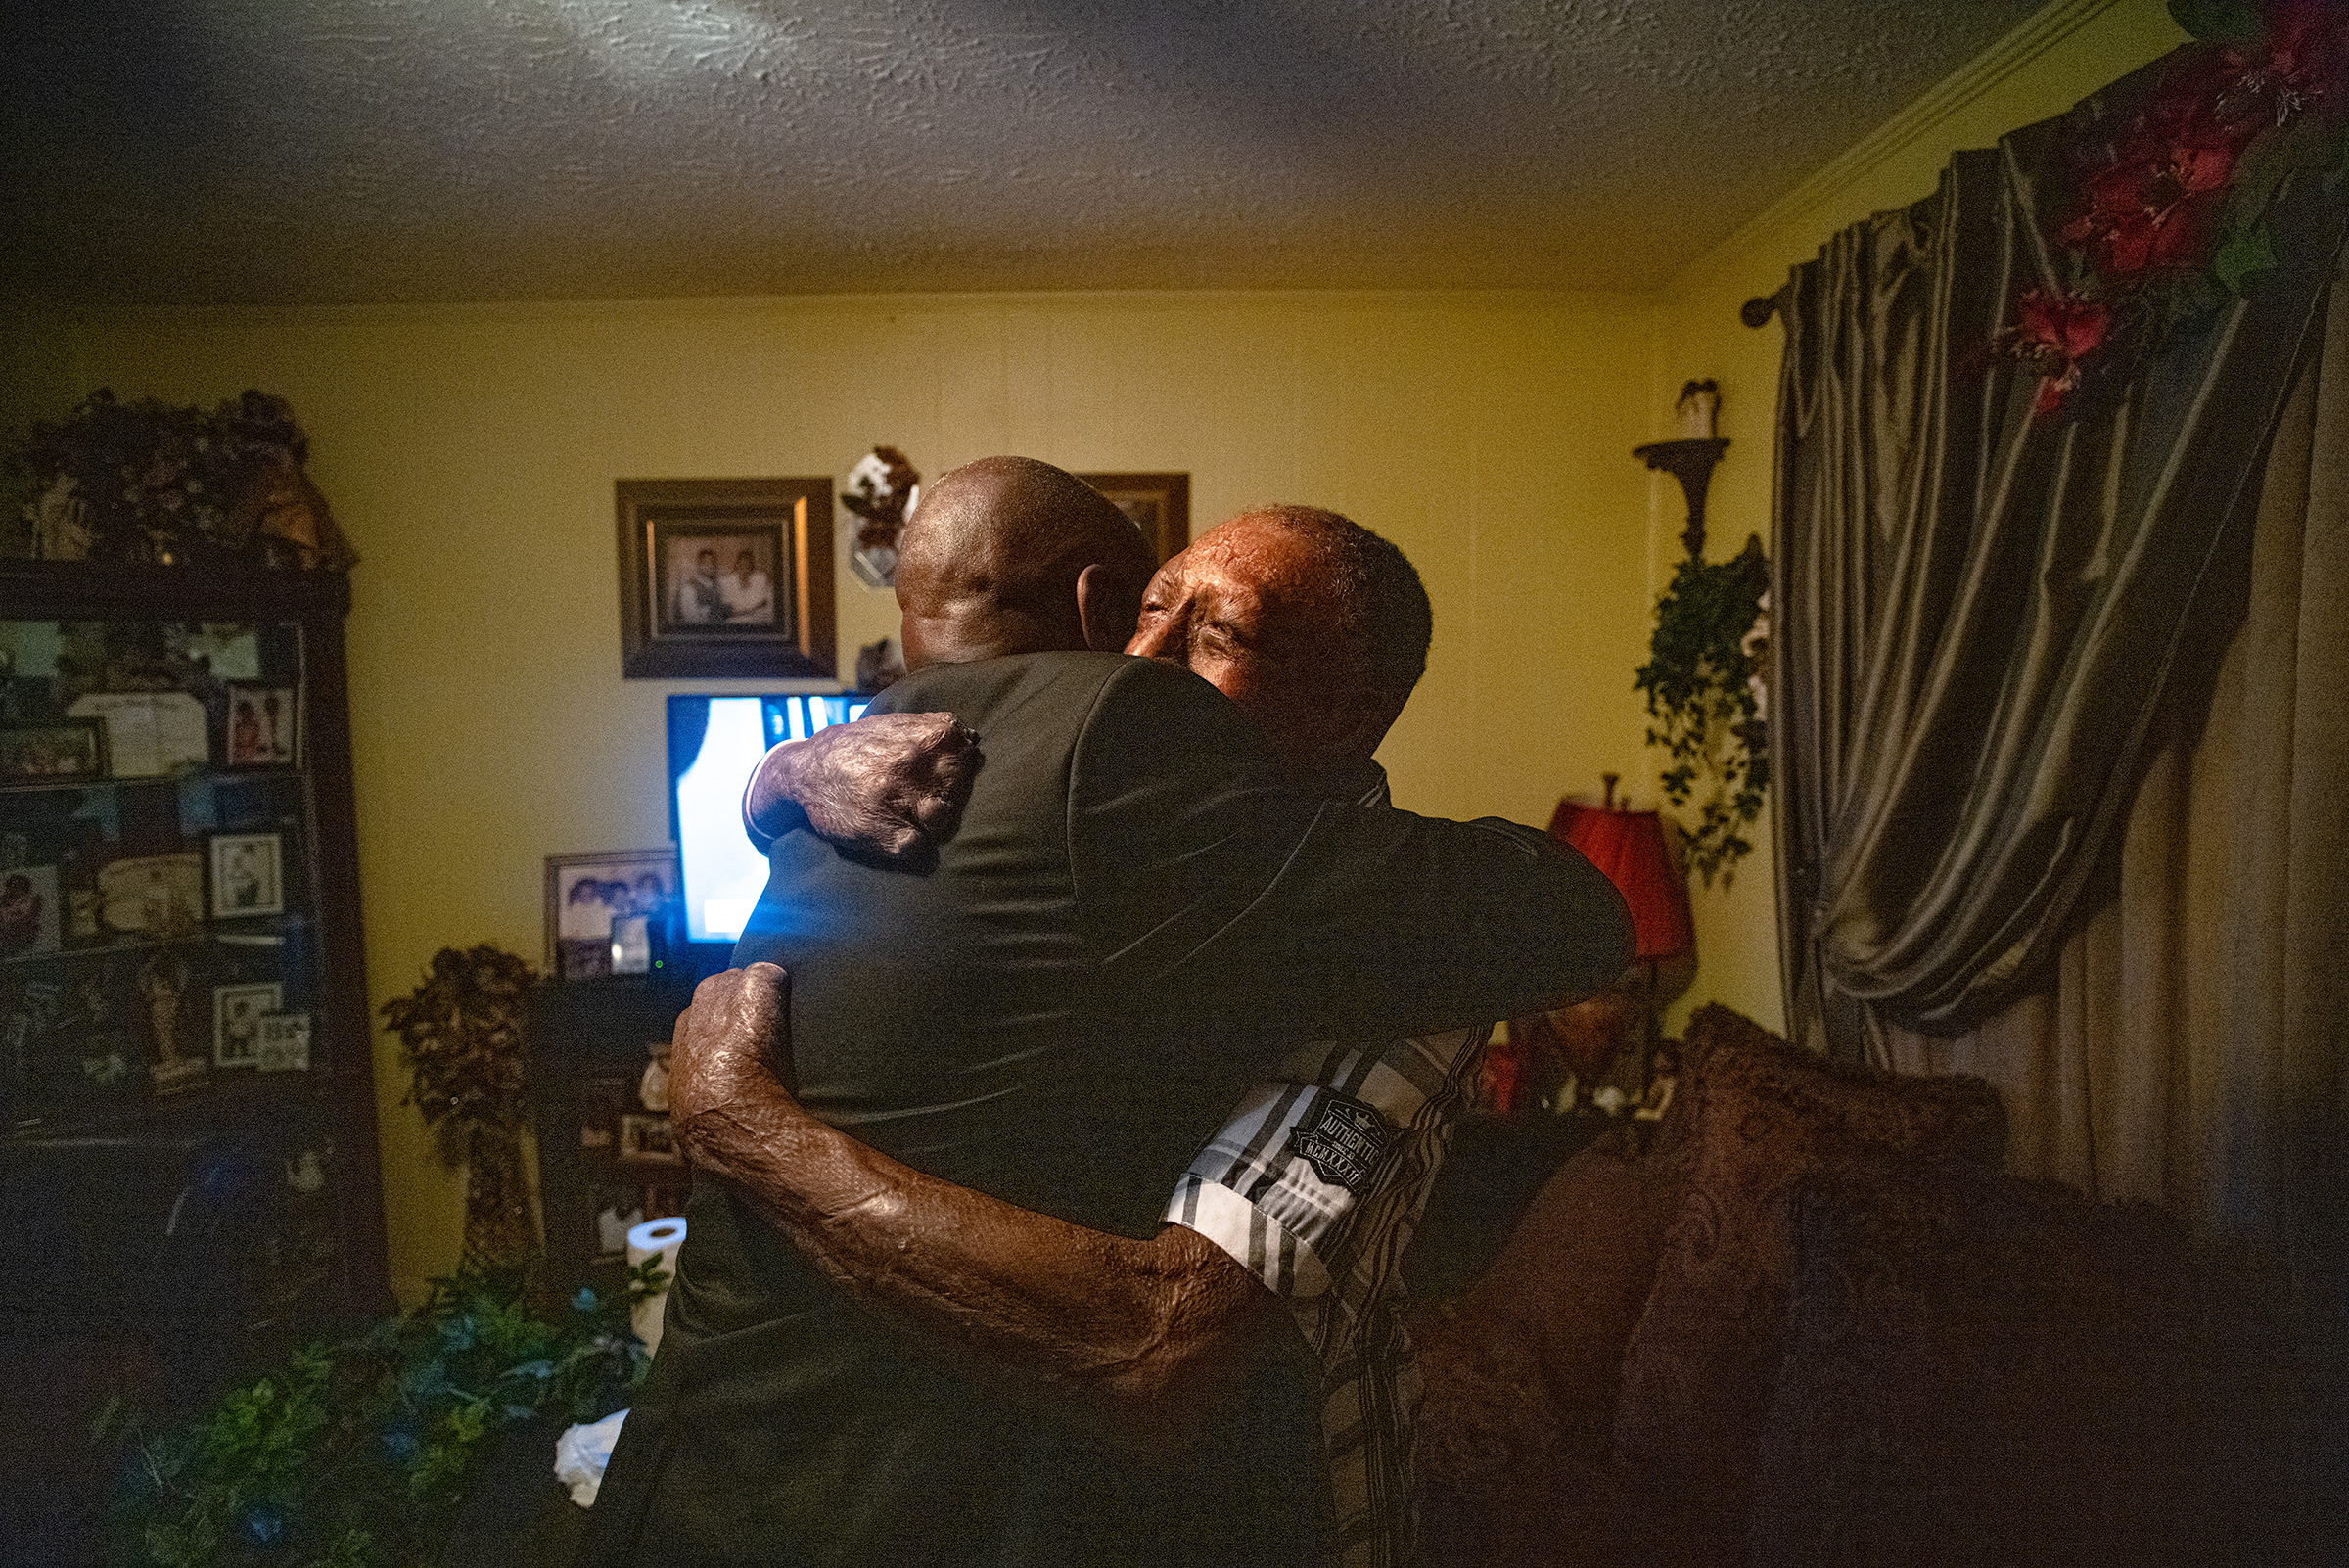 Crump hugs Curtis Jones, a client who was severely burned after an explosion at a manufacturing facility supplying the Department of Defense, at home in Tallahassee, Fla., on April 3. (Ruddy Roye for TIME)